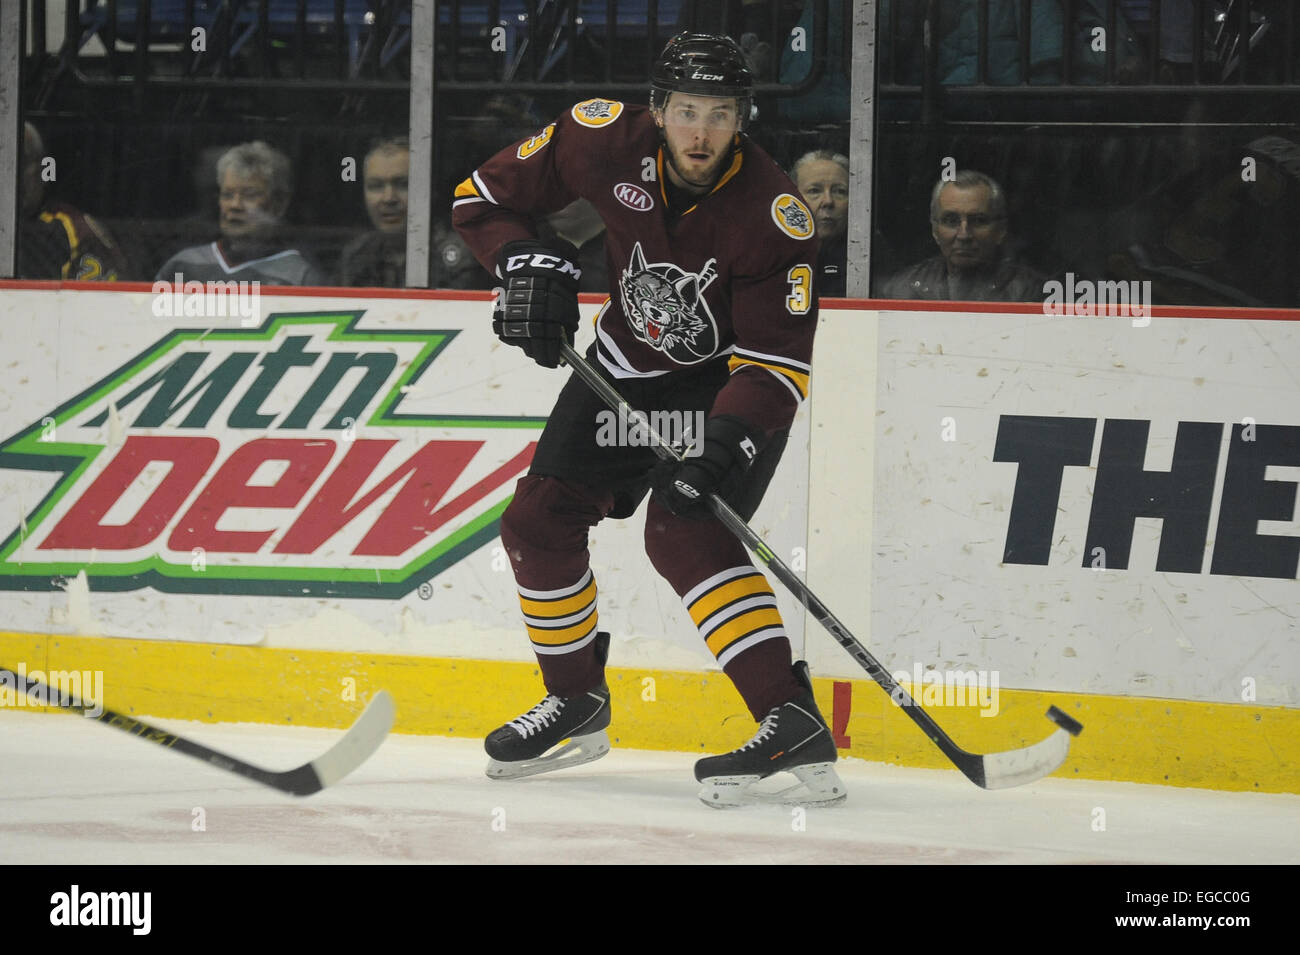 Rosemont, IL, USA. 22nd Feb, 2015. Chicago Wolves' Joel Edmundson (3) clears the puck during the American Hockey League game between the Chicago Wolves and the San Antonio Rampage at the Allstate Arena in Rosemont, IL. Patrick Gorski/CSM/Alamy Live News Stock Photo